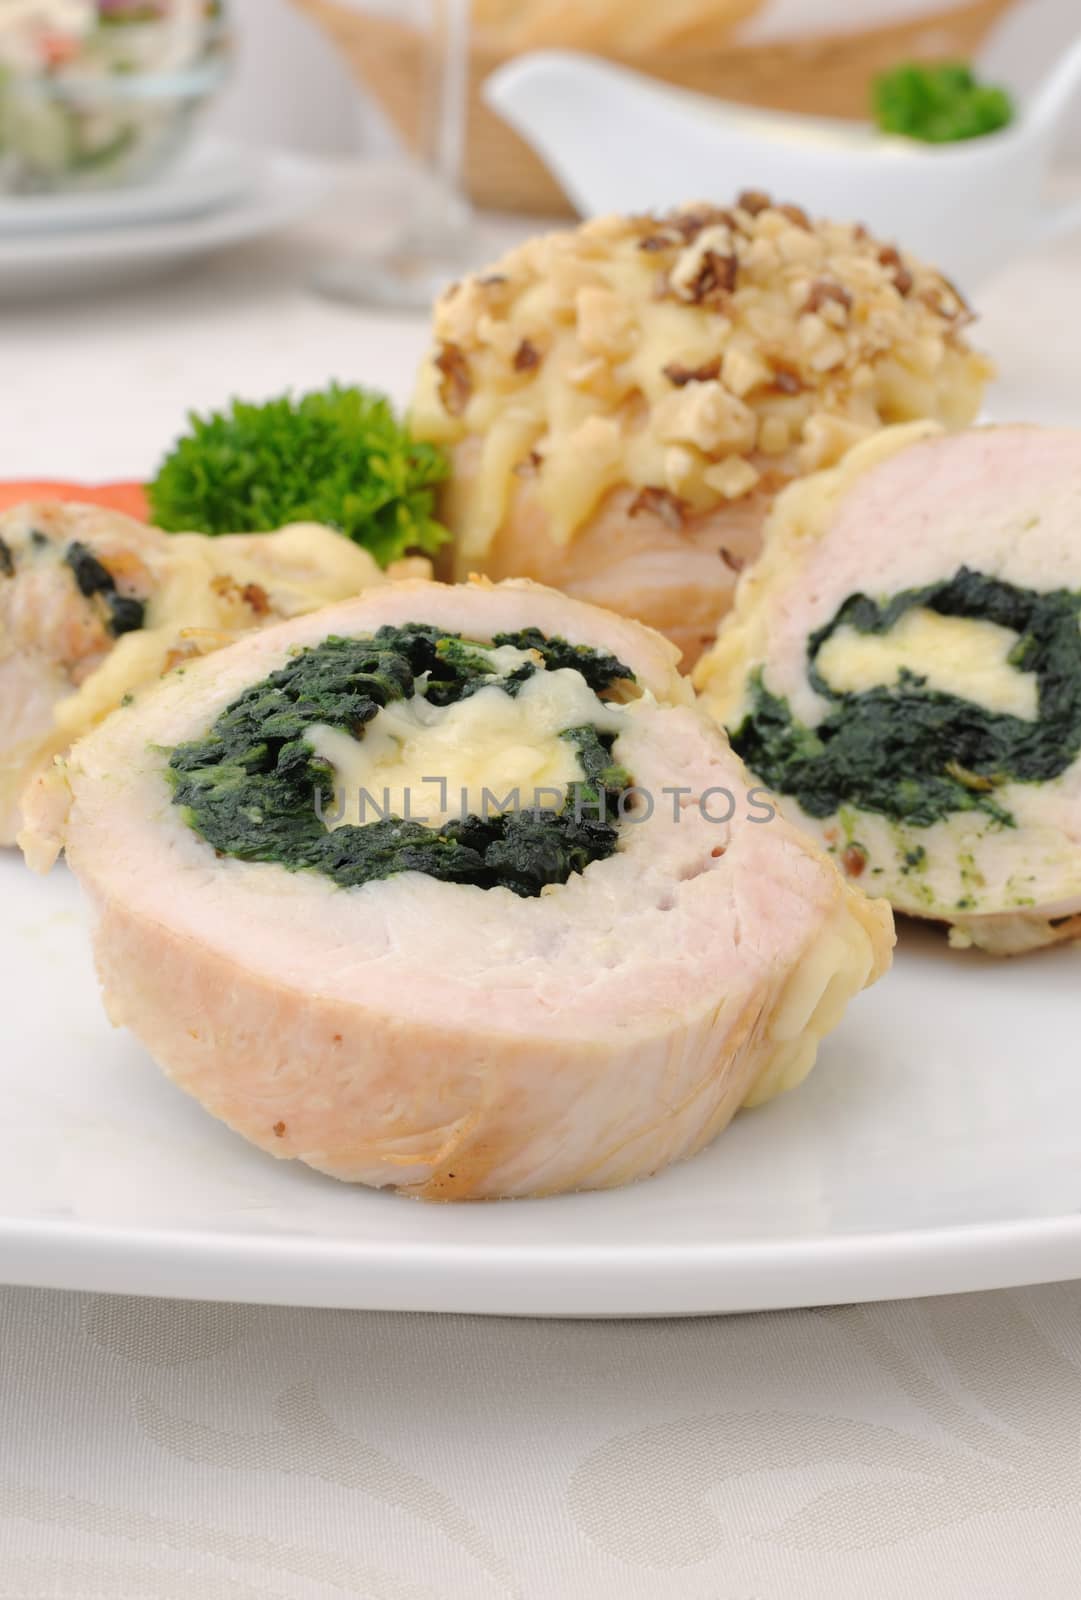 Sliced chicken roll stuffed with spinach and mozzarella and cheese with walnuts